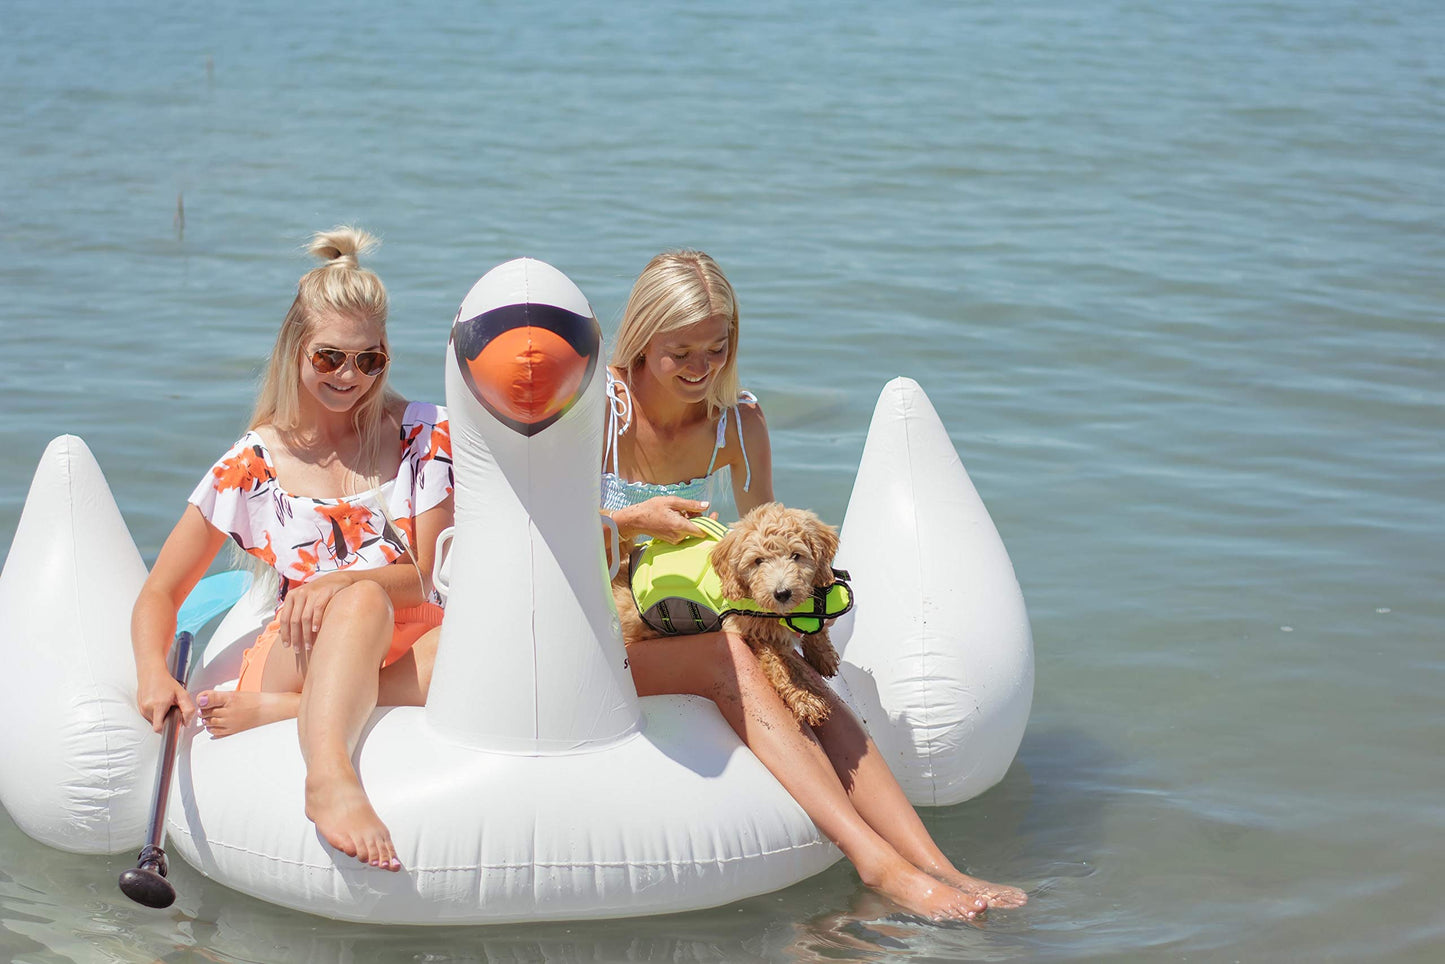 SWIMLINE Original Giant Ride On Inflatable Pool Float Lounge Series | Floaties W/Stable Legs Wings Large Rideable Blow Up Summer Beach Swimming Party Big Raft Tube Decoration Tan Toys for Kids Adults Swan Original